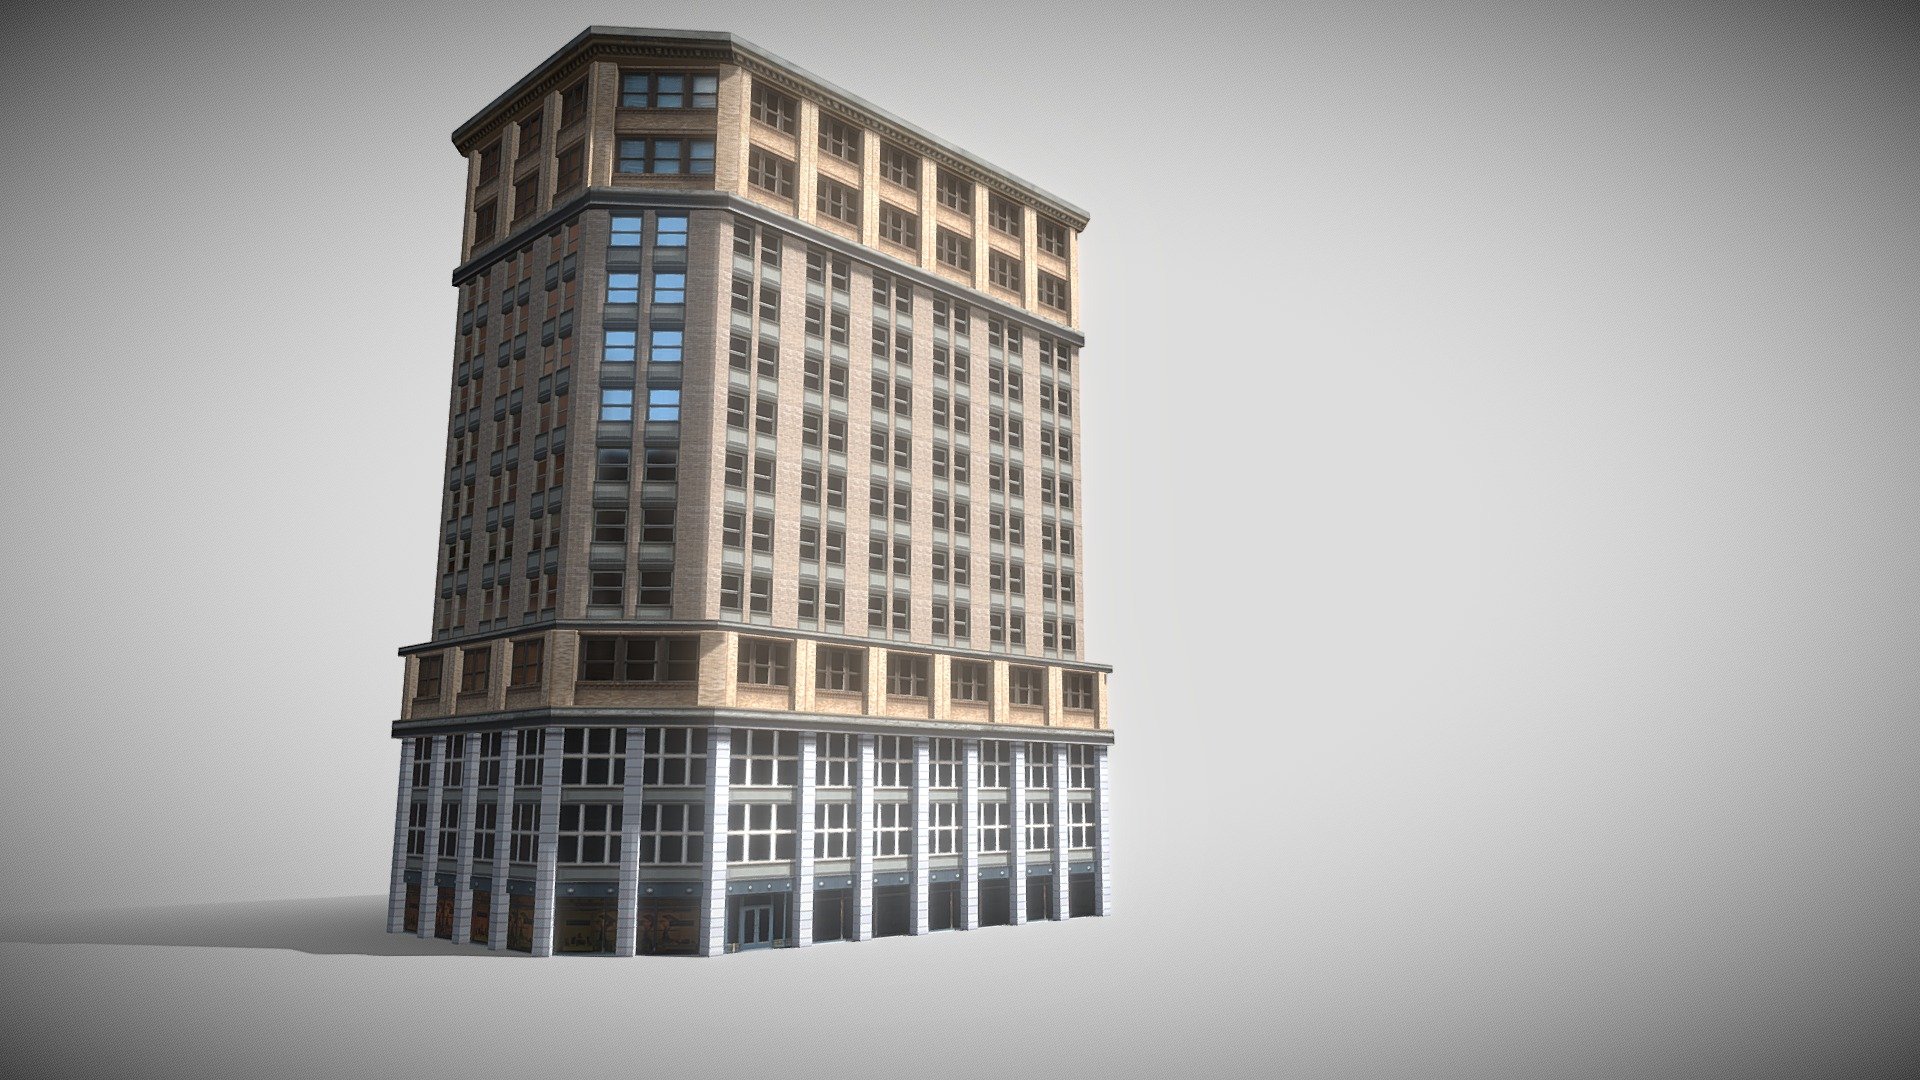 Mid poly downtown building ready for games! Very optimized with high details

If you think this model is cool, please leave a like before downloading. It keeps me motivated! :) - Game Ready Mid Poly Building - Download Free 3D model by ModelMaker (@mireubay1) 3d model